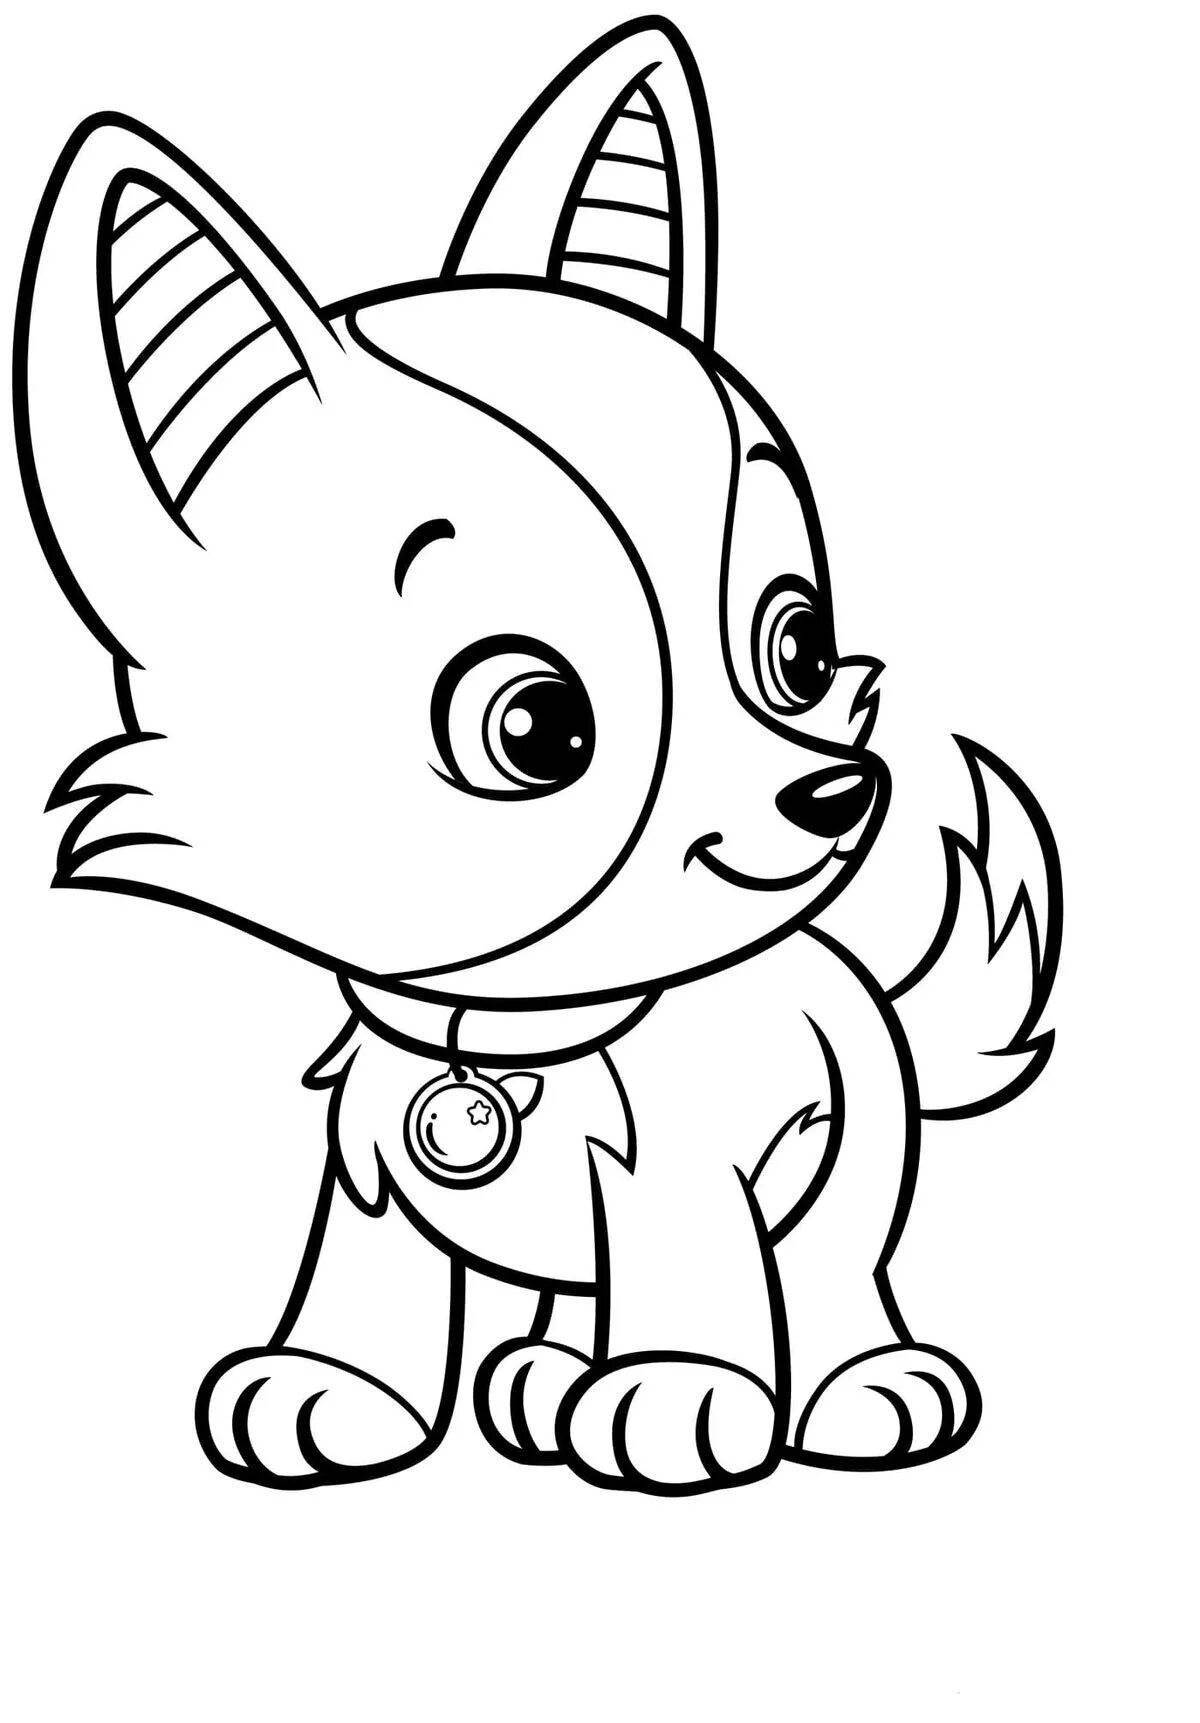 Caution cute dog coloring